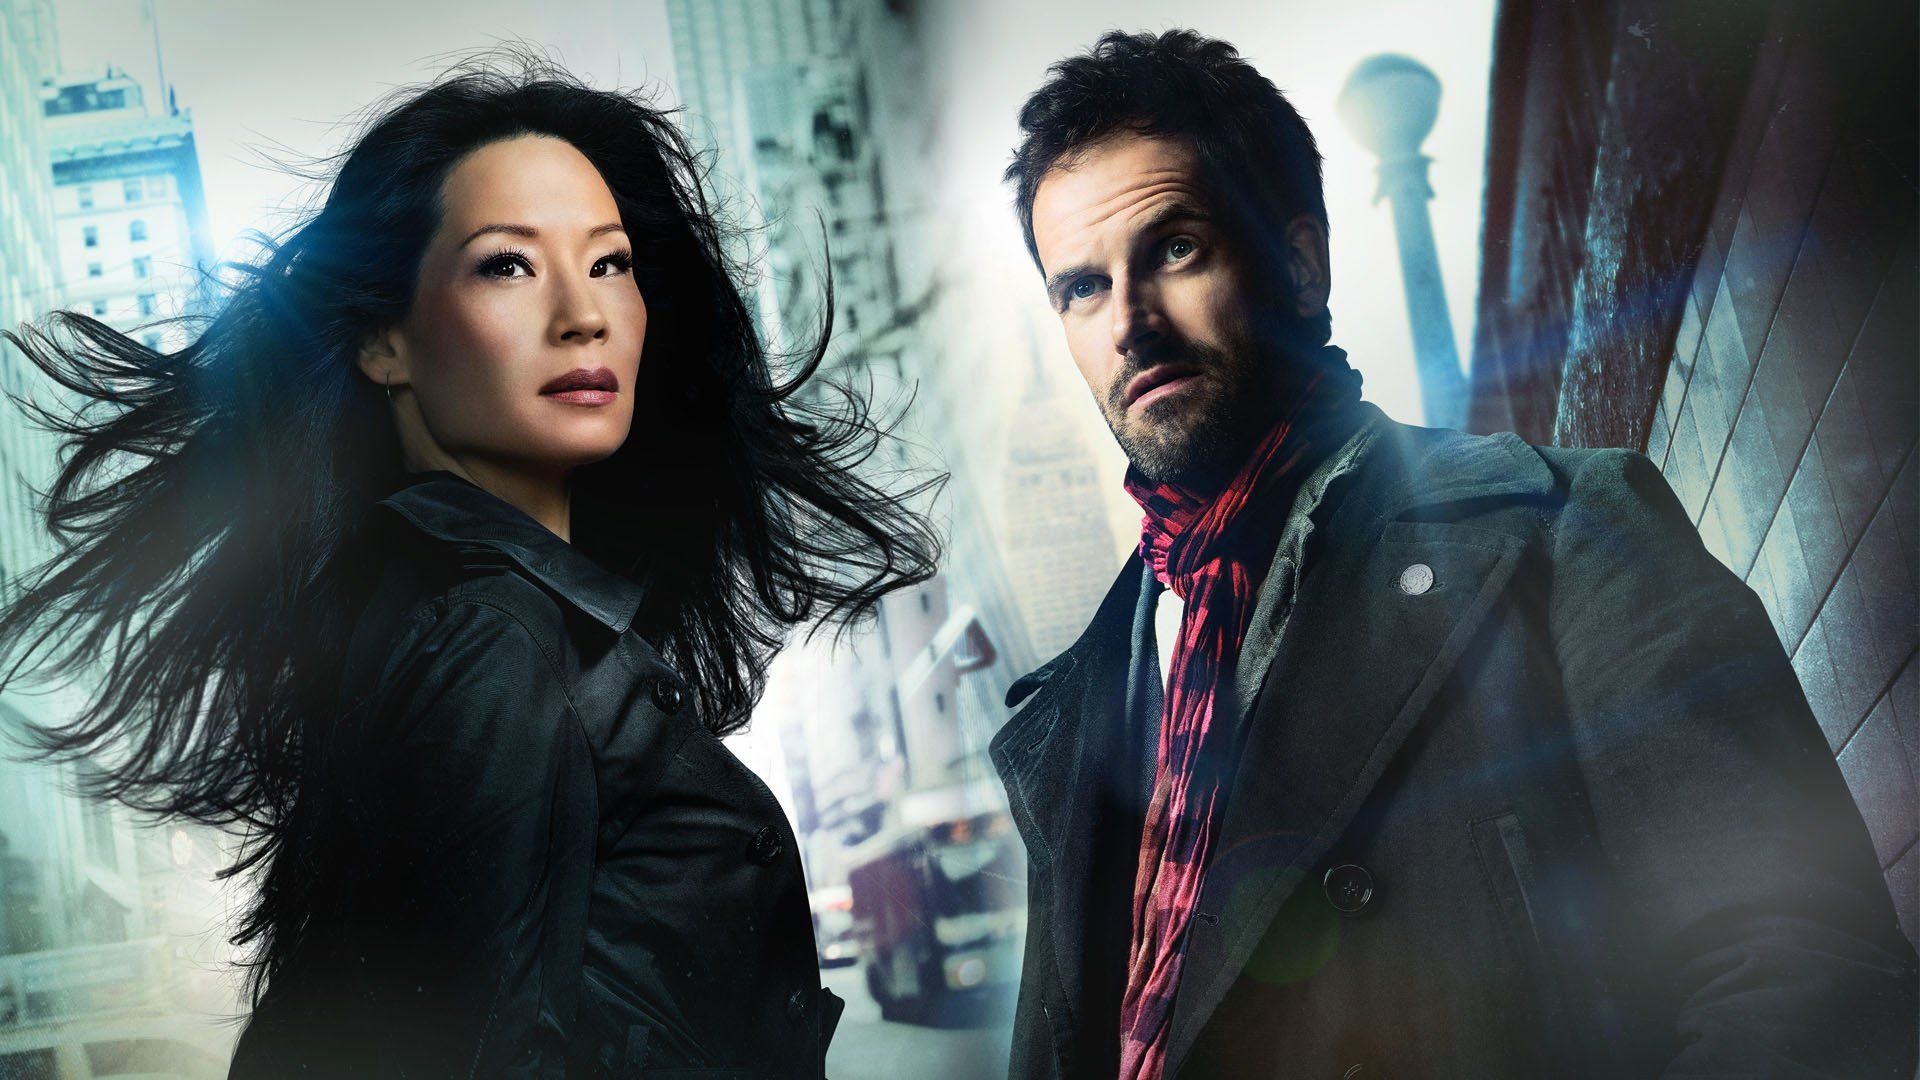 Lucy Liu: Elementary, The role of Dr. Joan Watson. 1920x1080 Full HD Background.